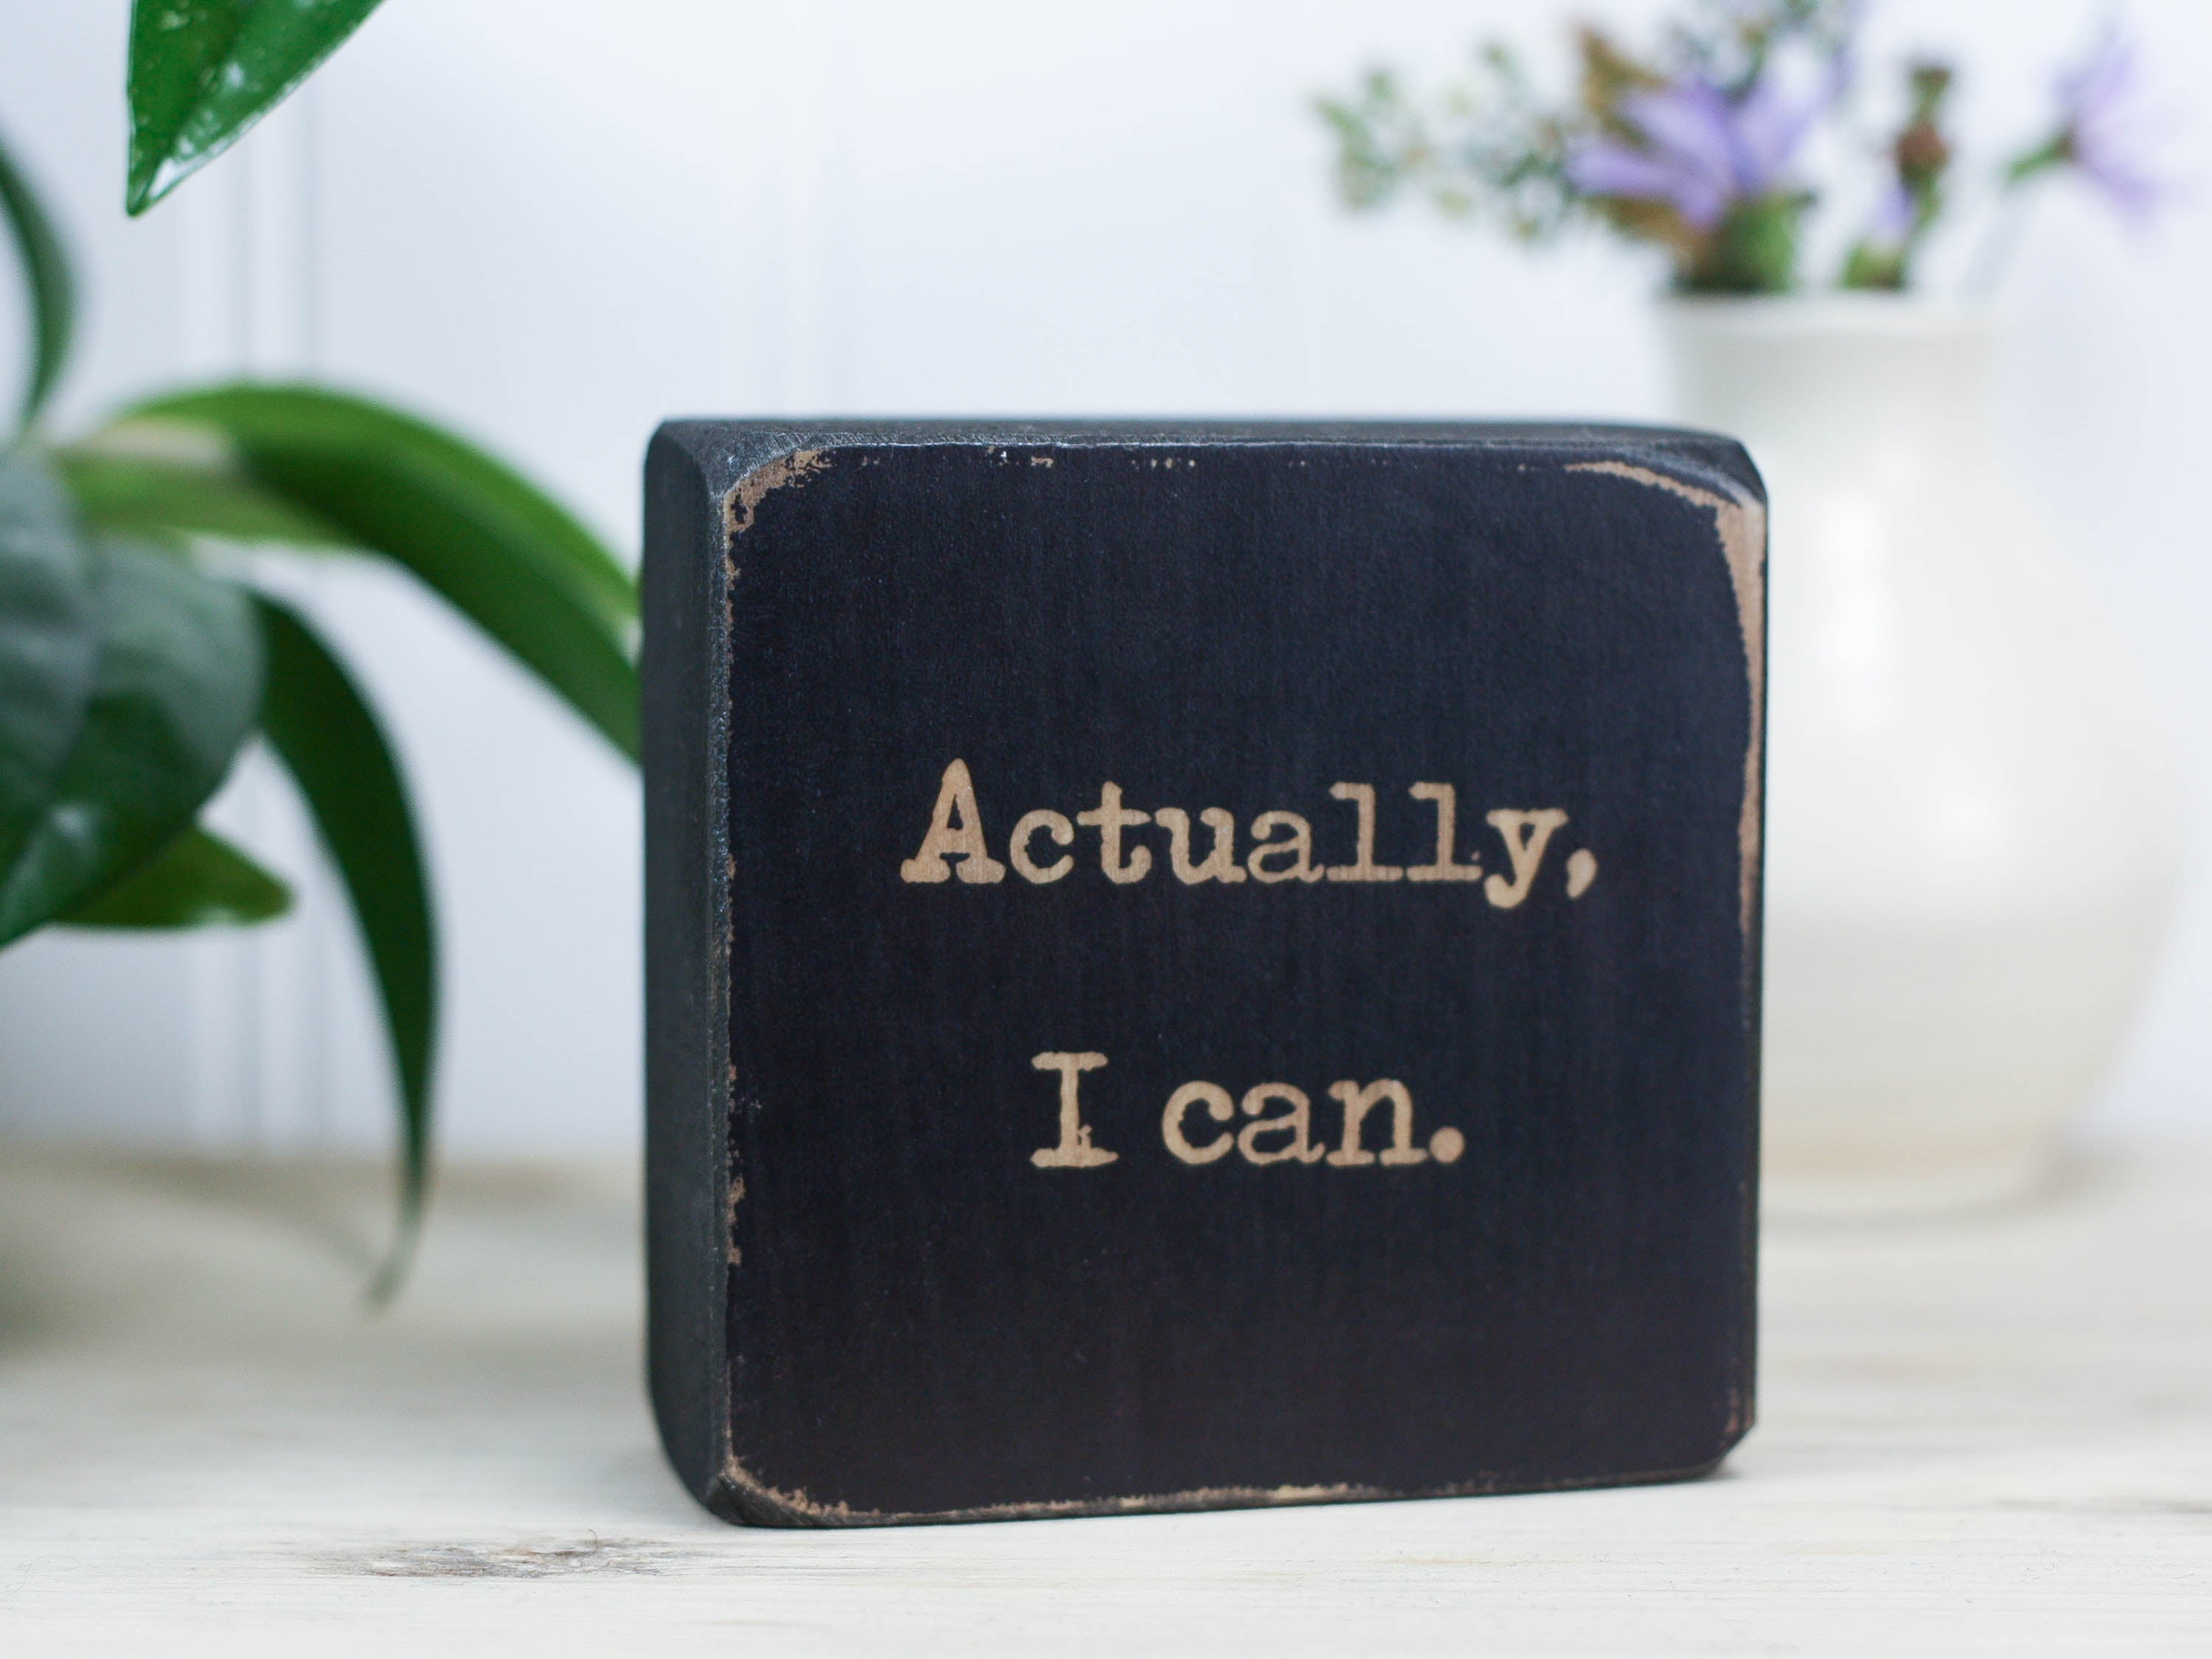 Small motivational wood sign in distressed black with the saying "Actually, I can."